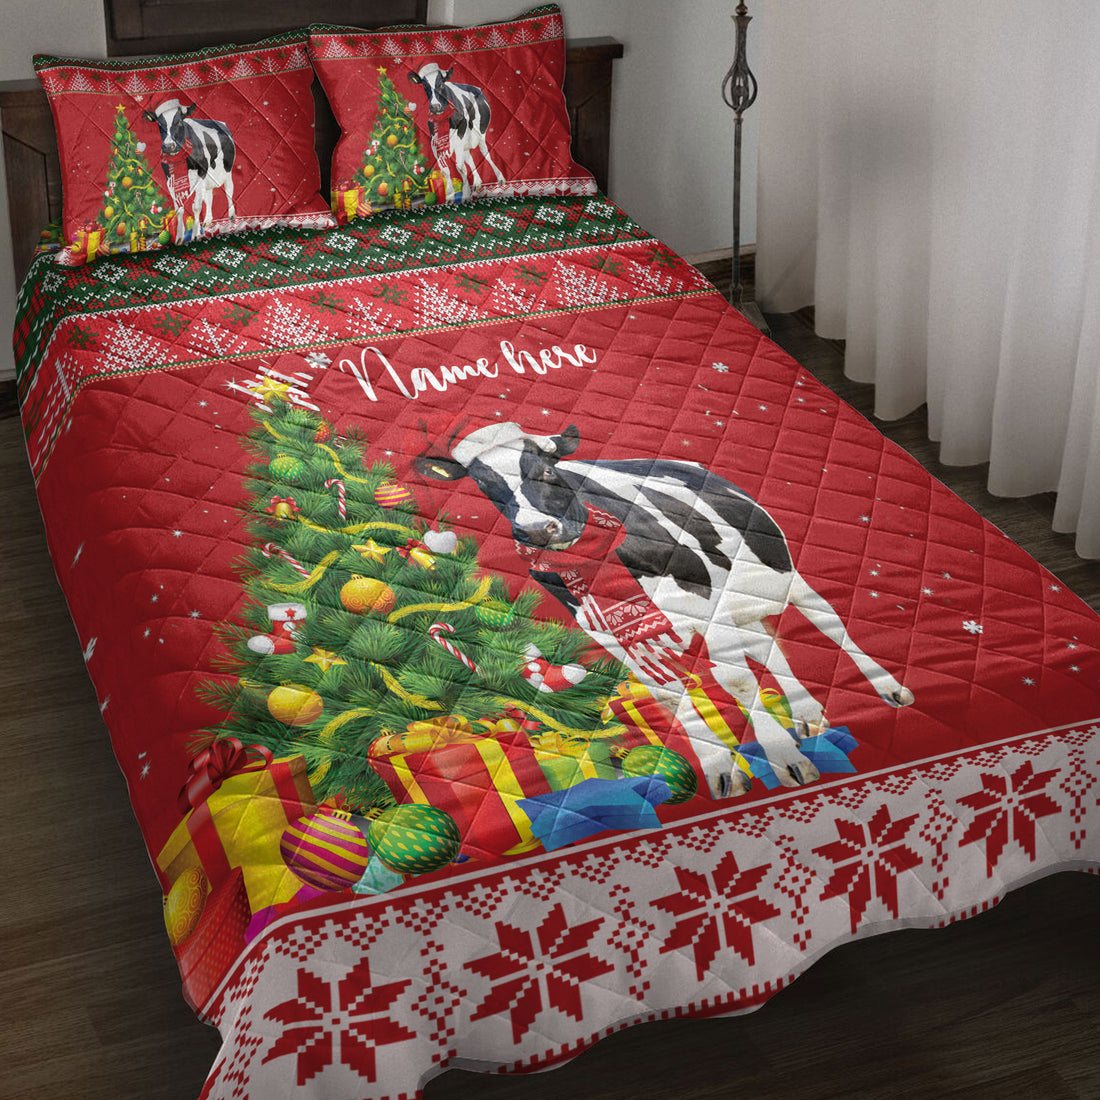 Ohaprints-Quilt-Bed-Set-Pillowcase-Cow-Christmas-Tree-String-Light-Custom-Personalized-Name-Blanket-Bedspread-Bedding-4075-Throw (55'' x 60'')